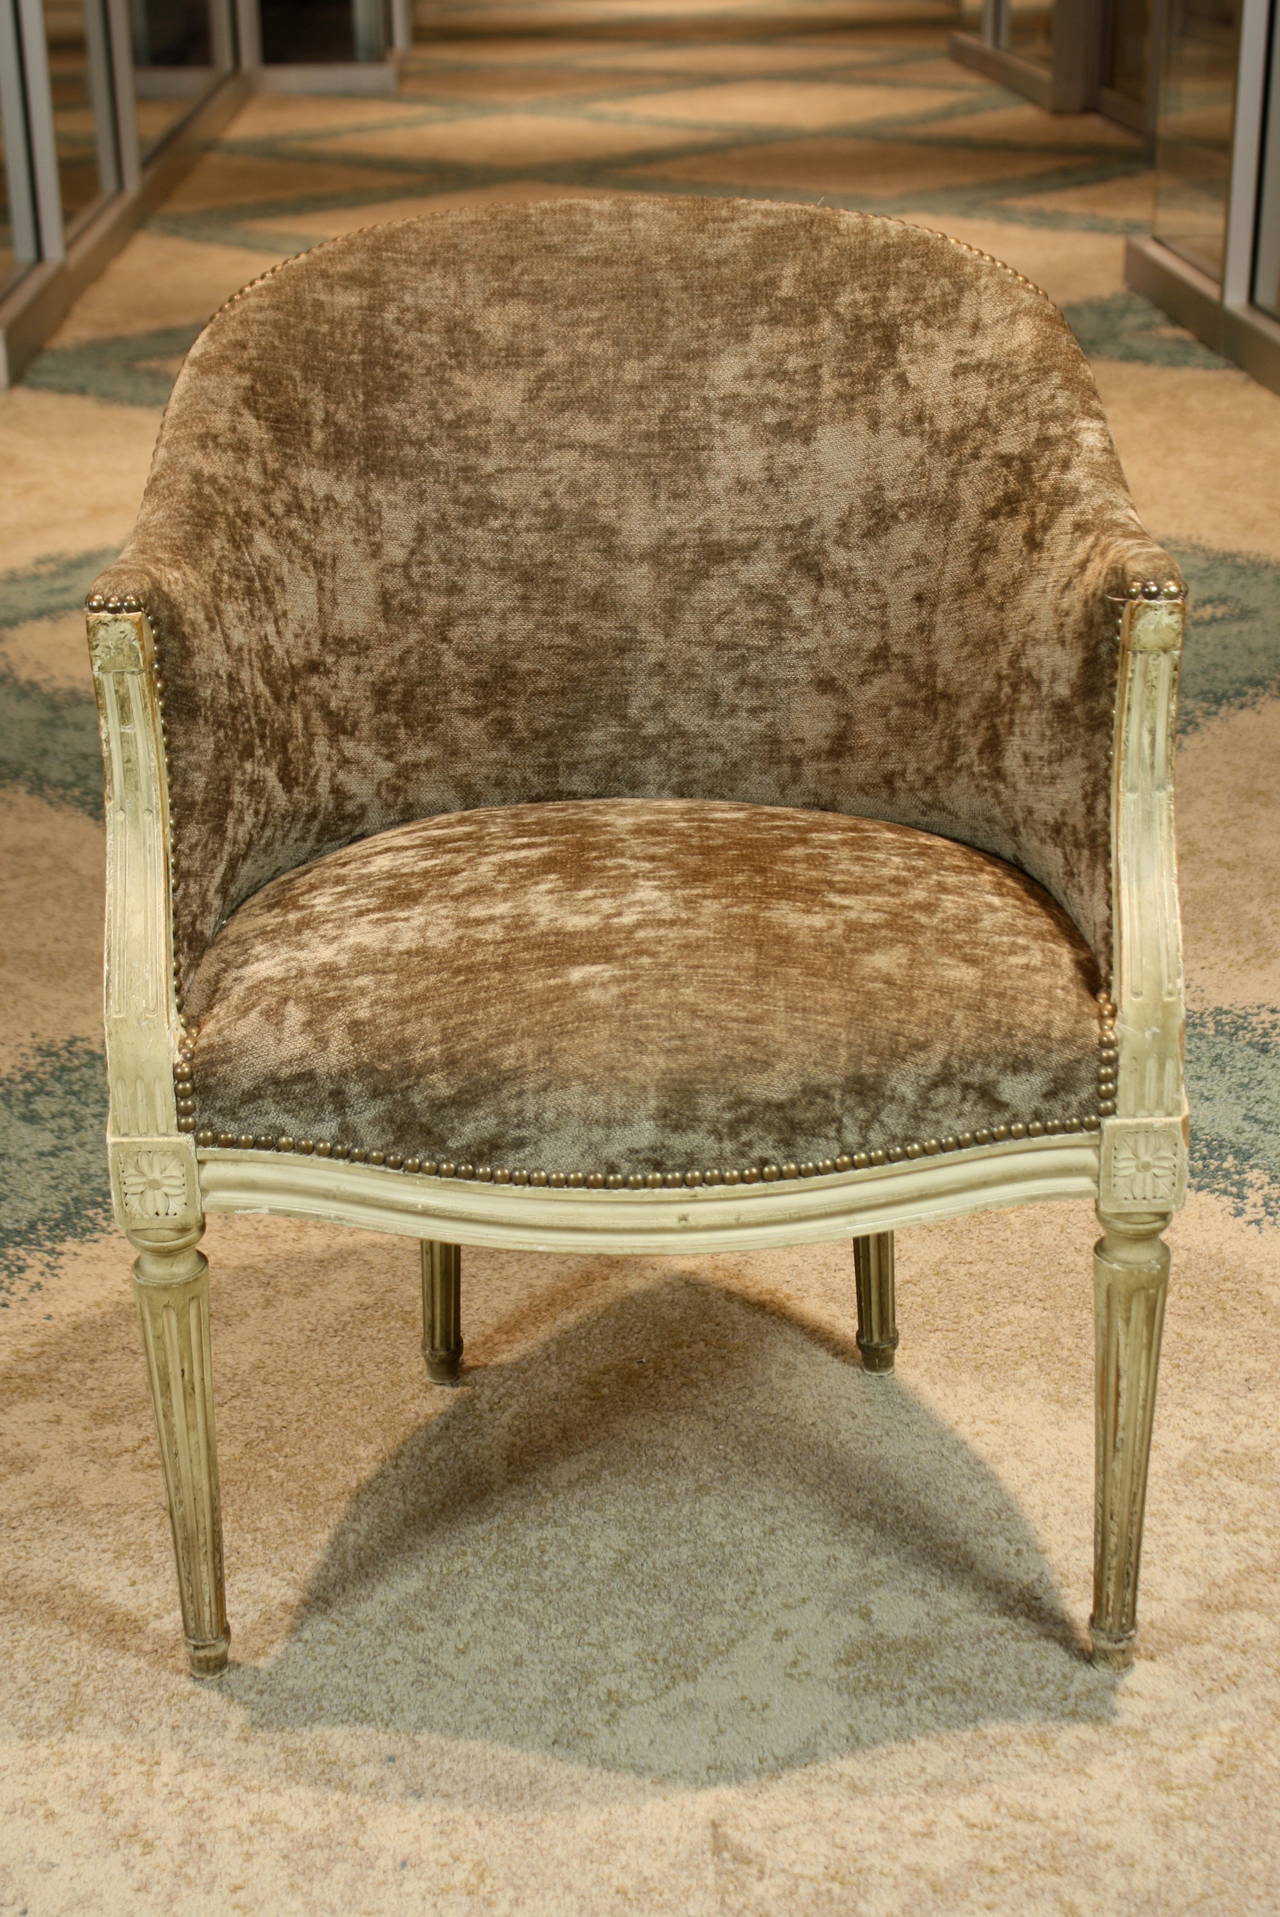 French Louis XVI style painted desk chair with new French velour upholstery and brass nail head trim.  The chair features unusual diamond shaped die joints with rosettes and fluted legs.